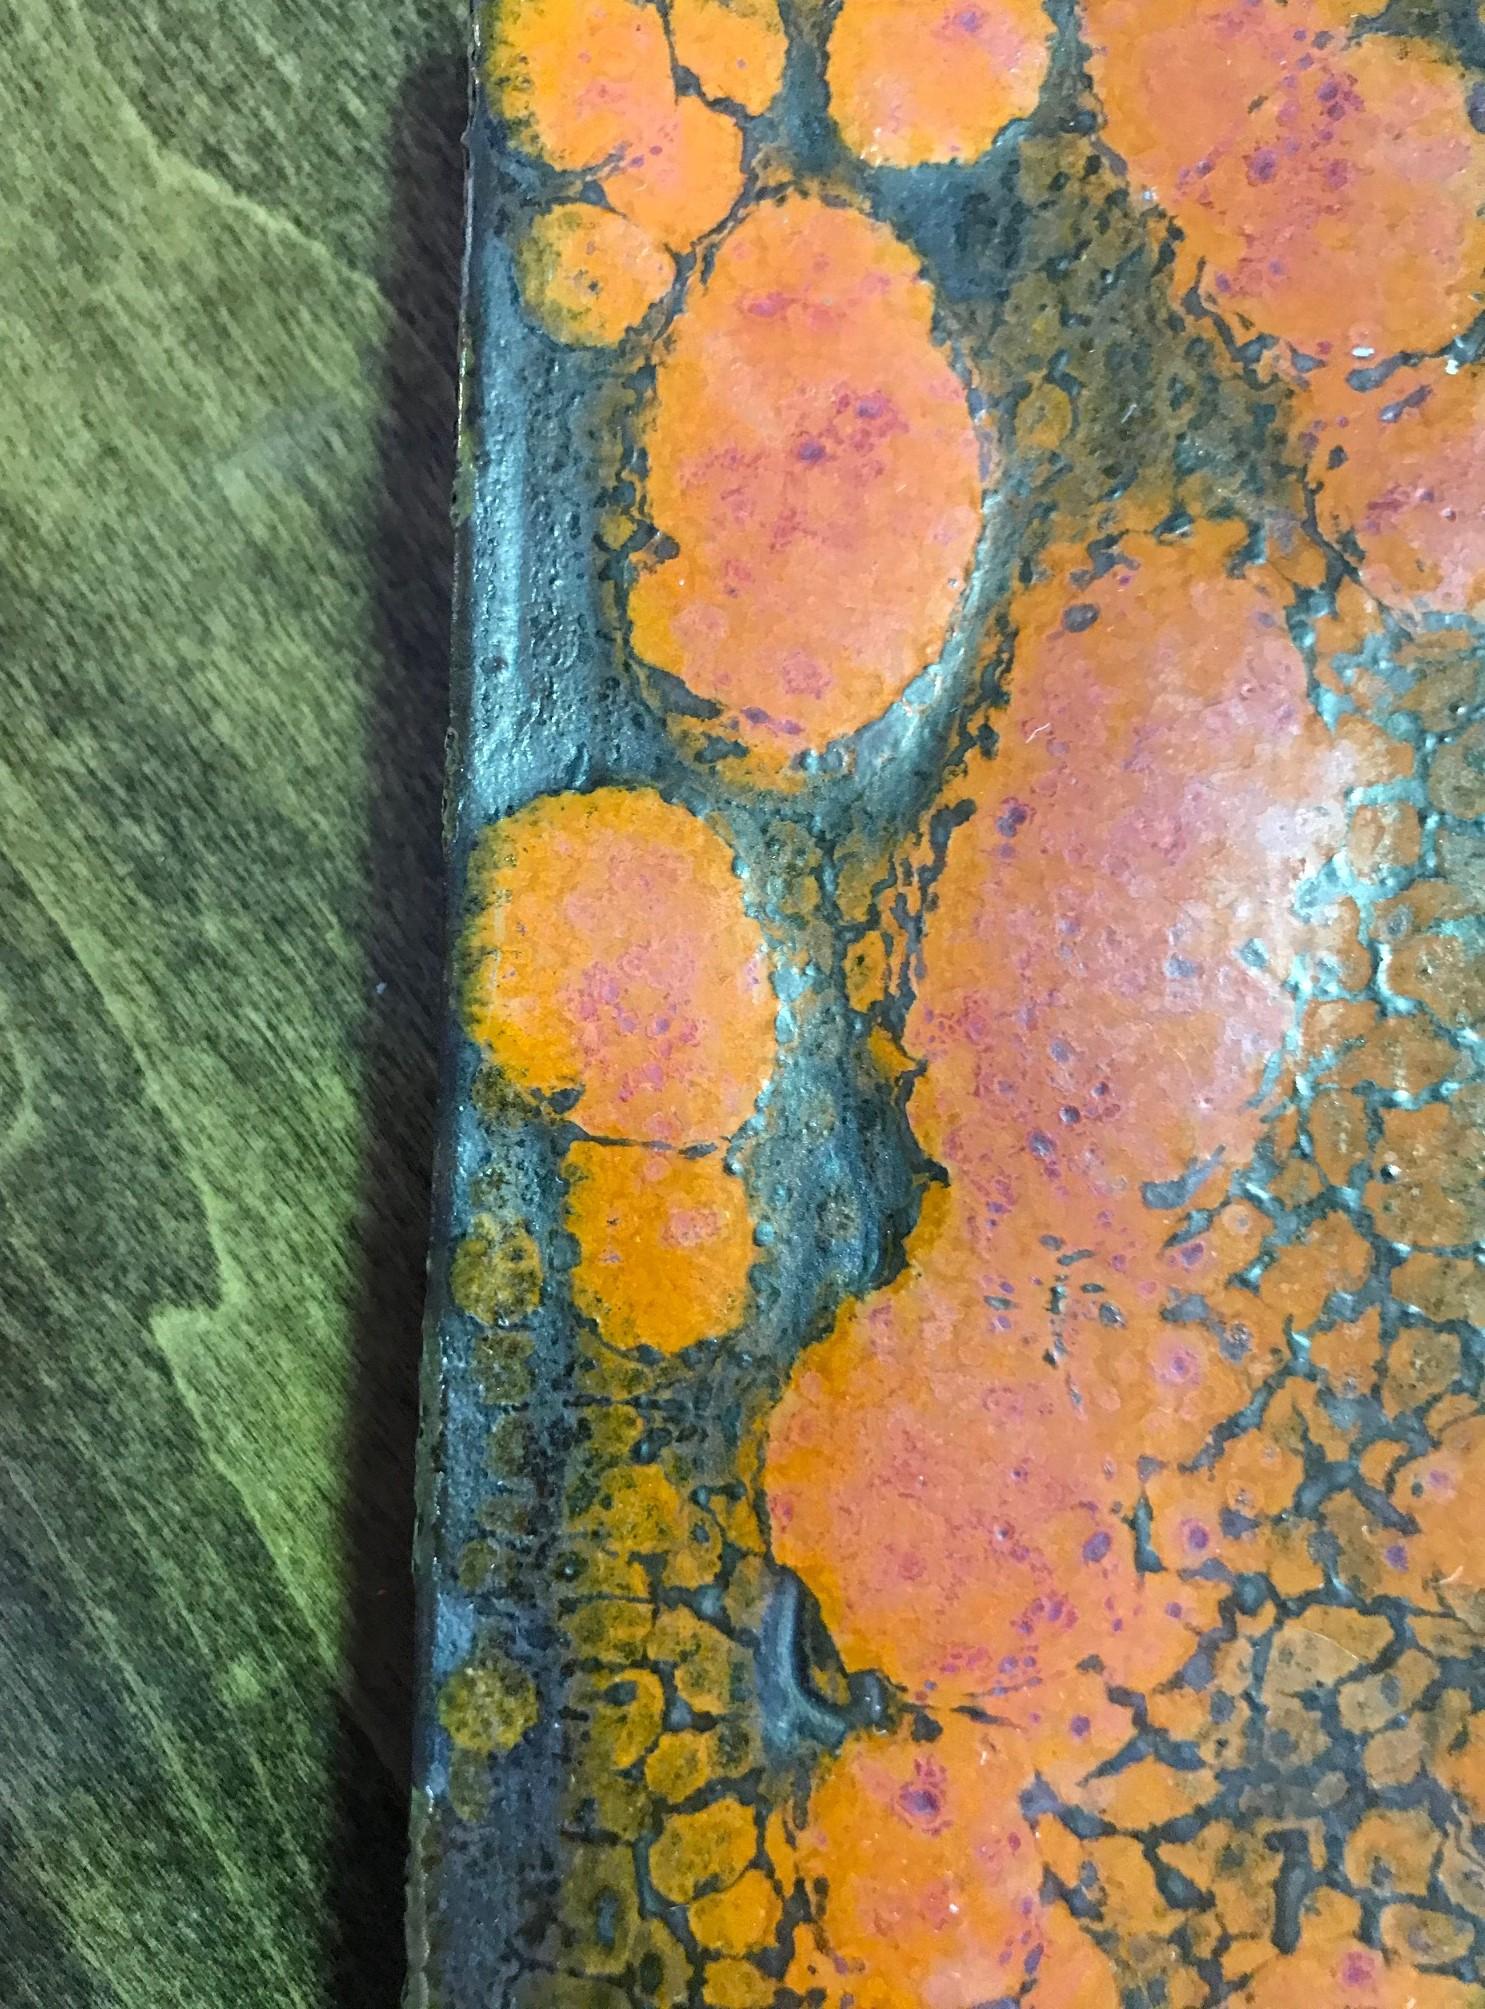 A beautifully glazed and colored ceramic tile by famed midcentury American artist/potter Doyle Lane. Lane was a glaze specialist much like Glen Lukens and Otto Natzler. His colorful glazes would melt, bubble and crack over his pieces creating a very